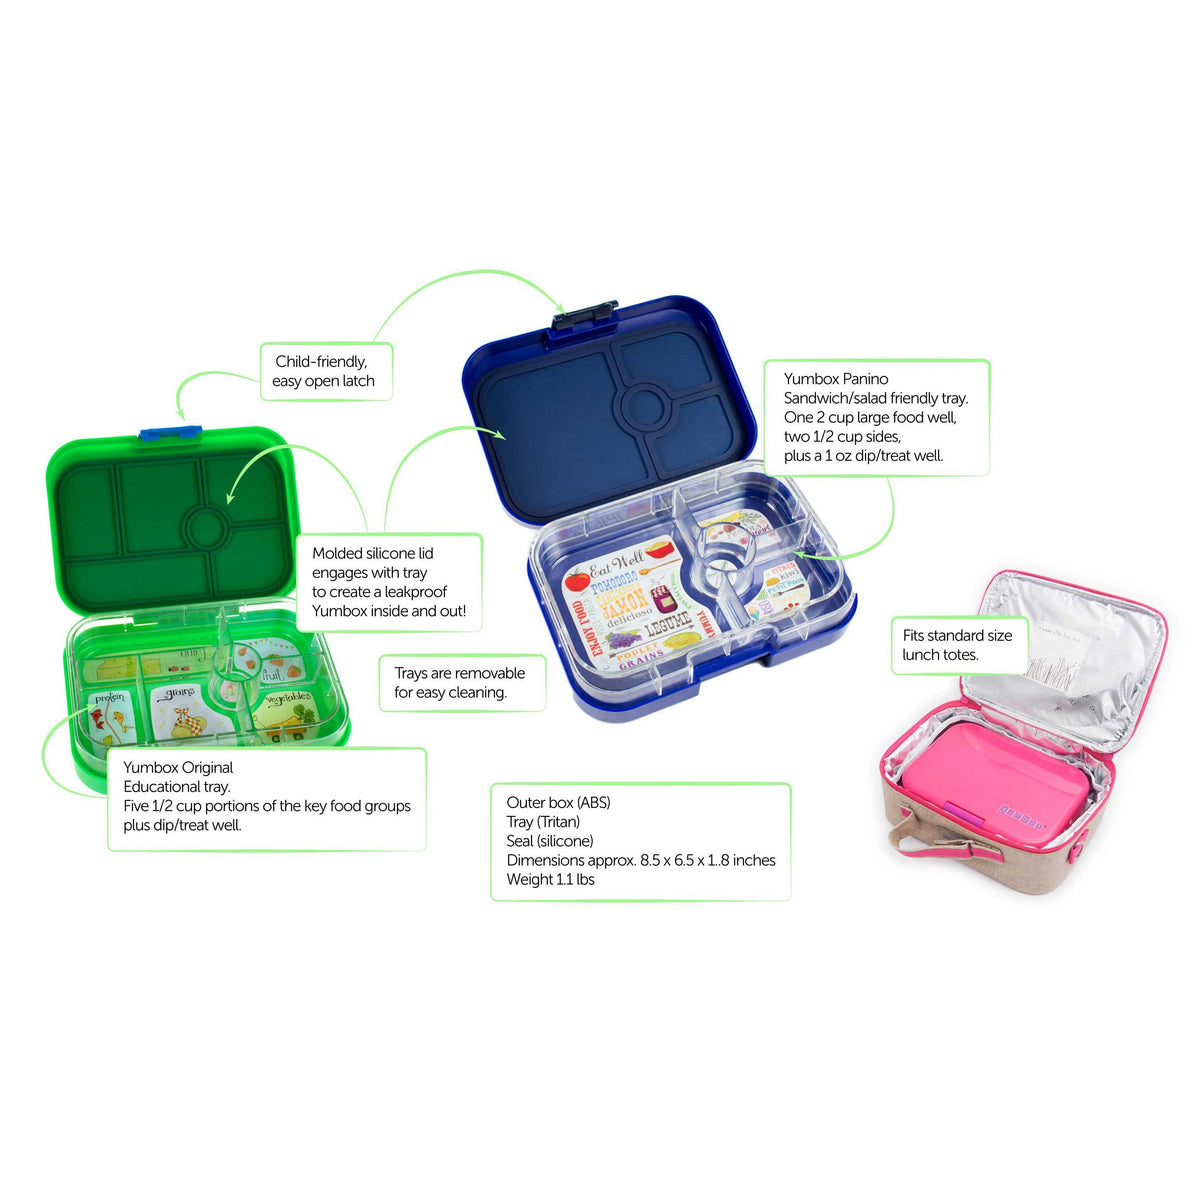 yumbox-panino-blue-fish-route-66-4-compartment-lunch-box- (5)